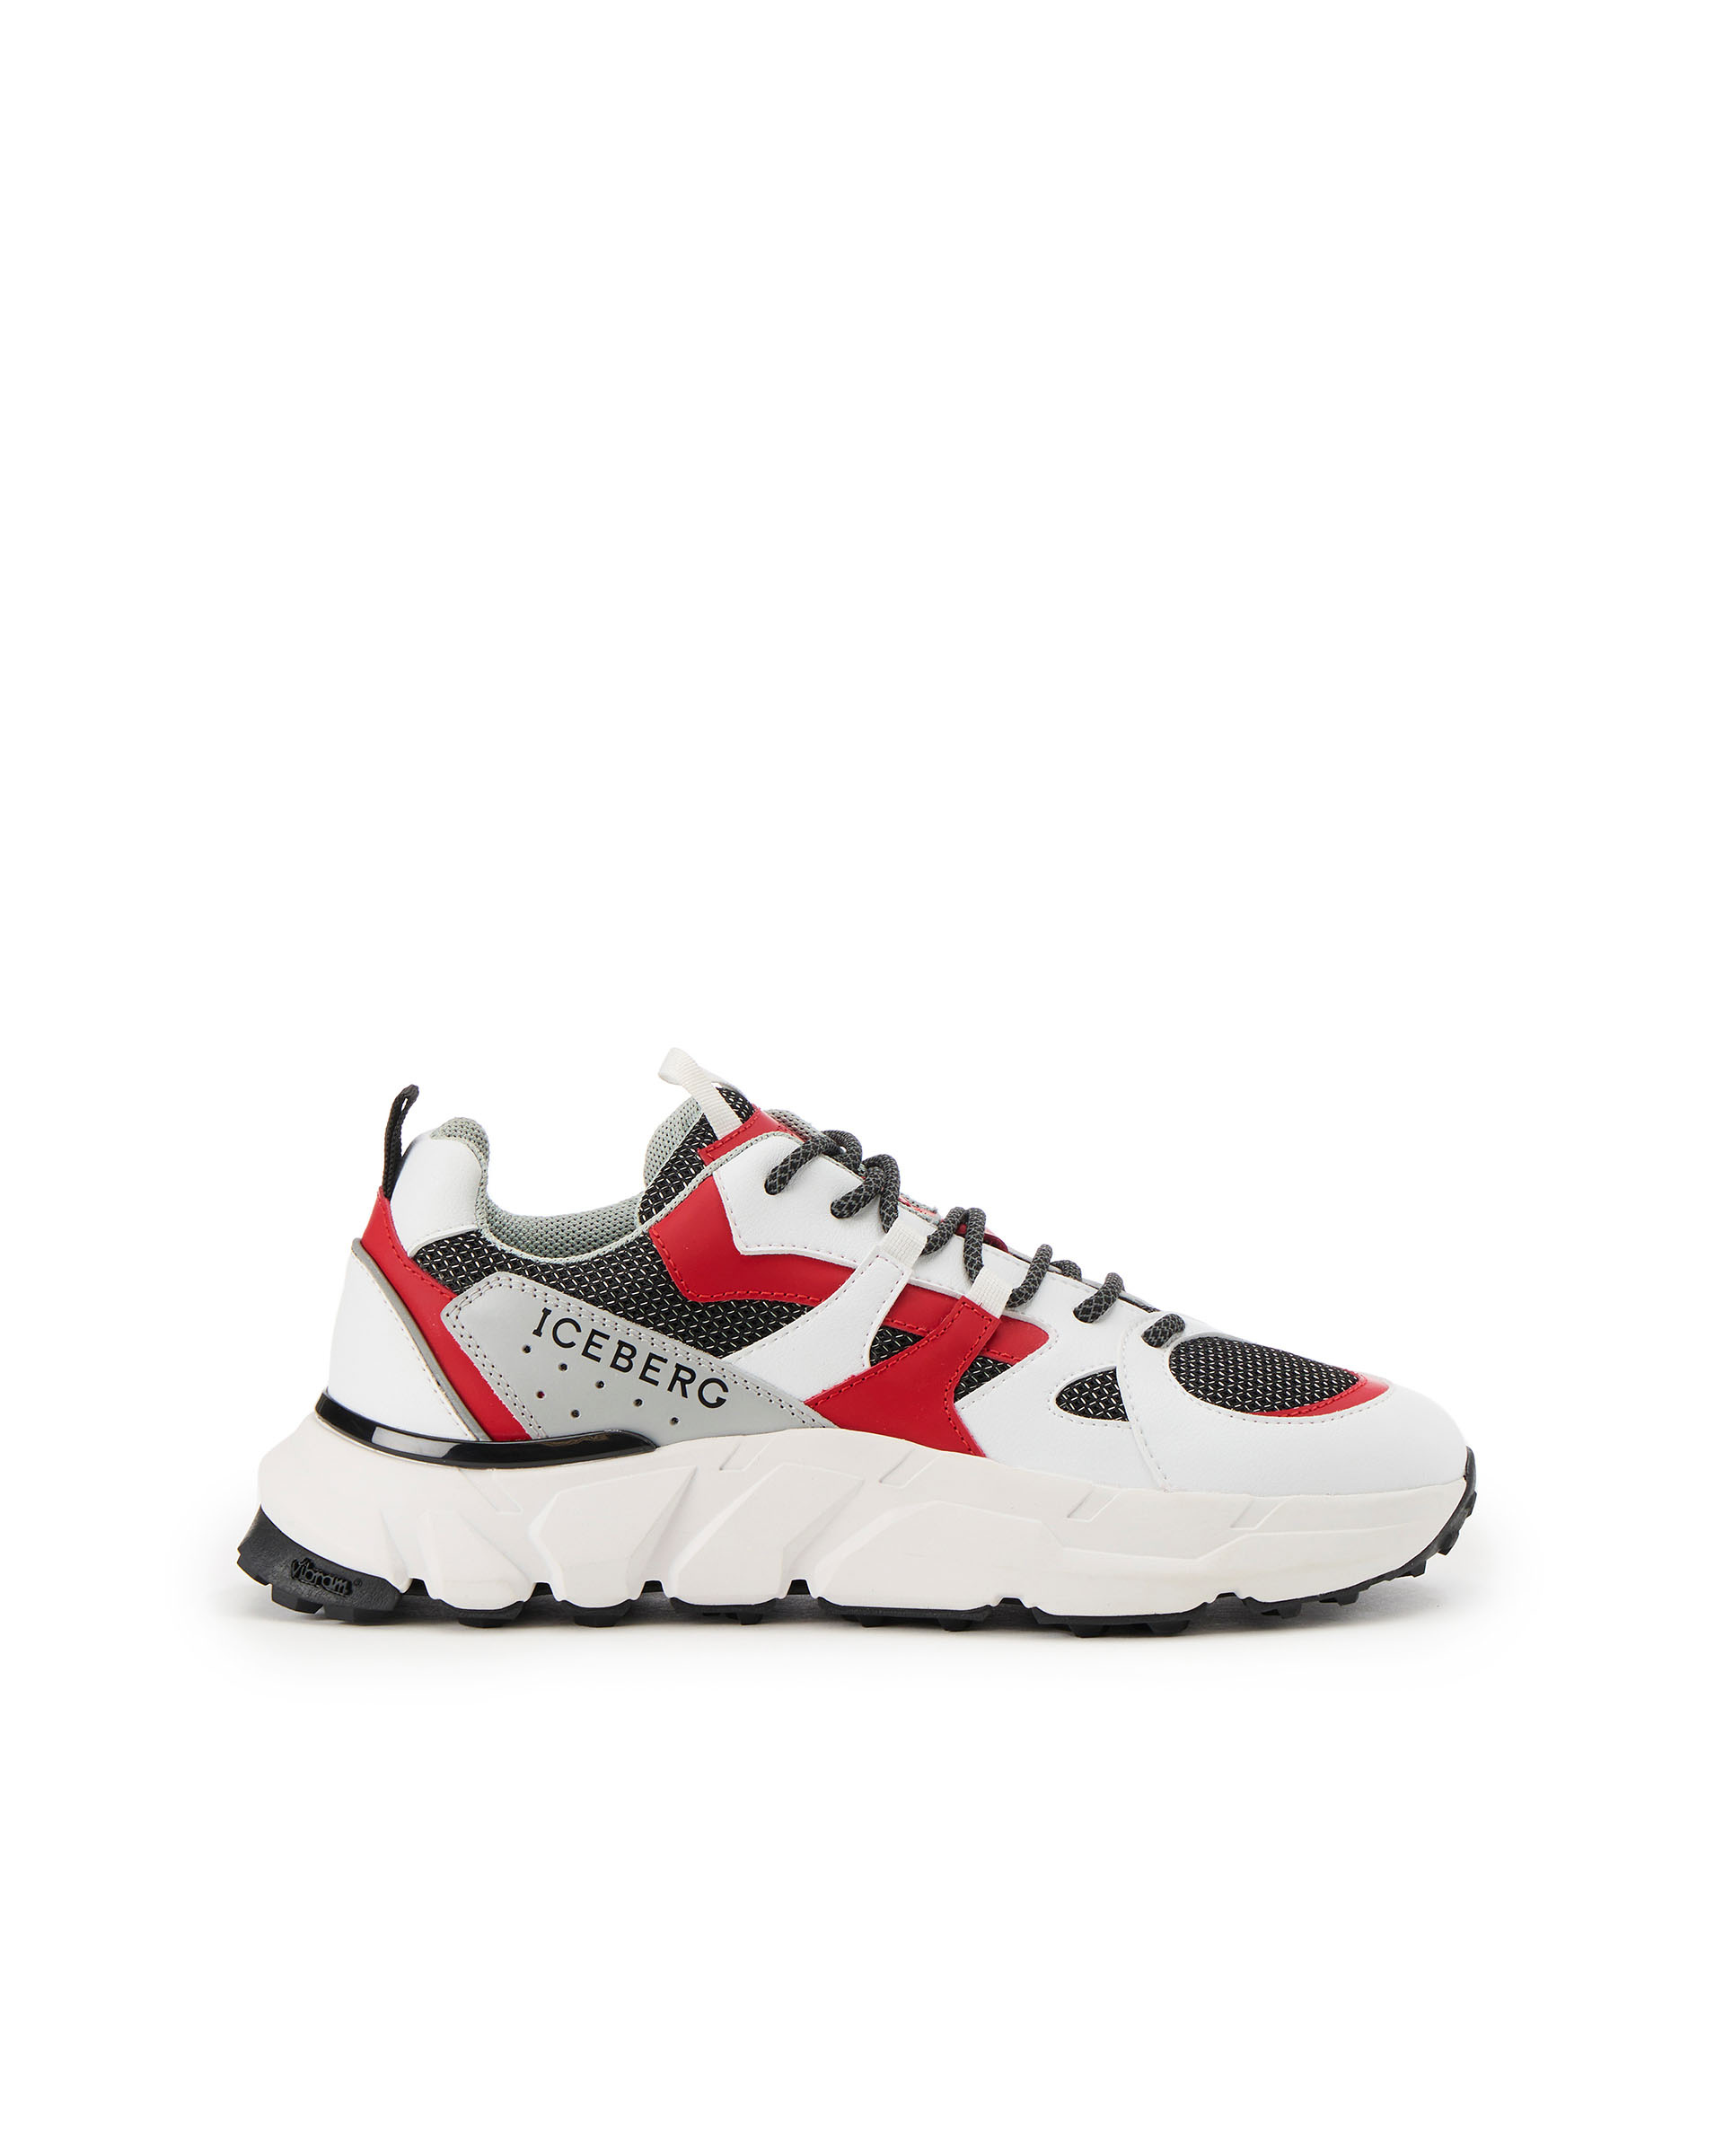 Versace Chain Reaction 2 Red Black